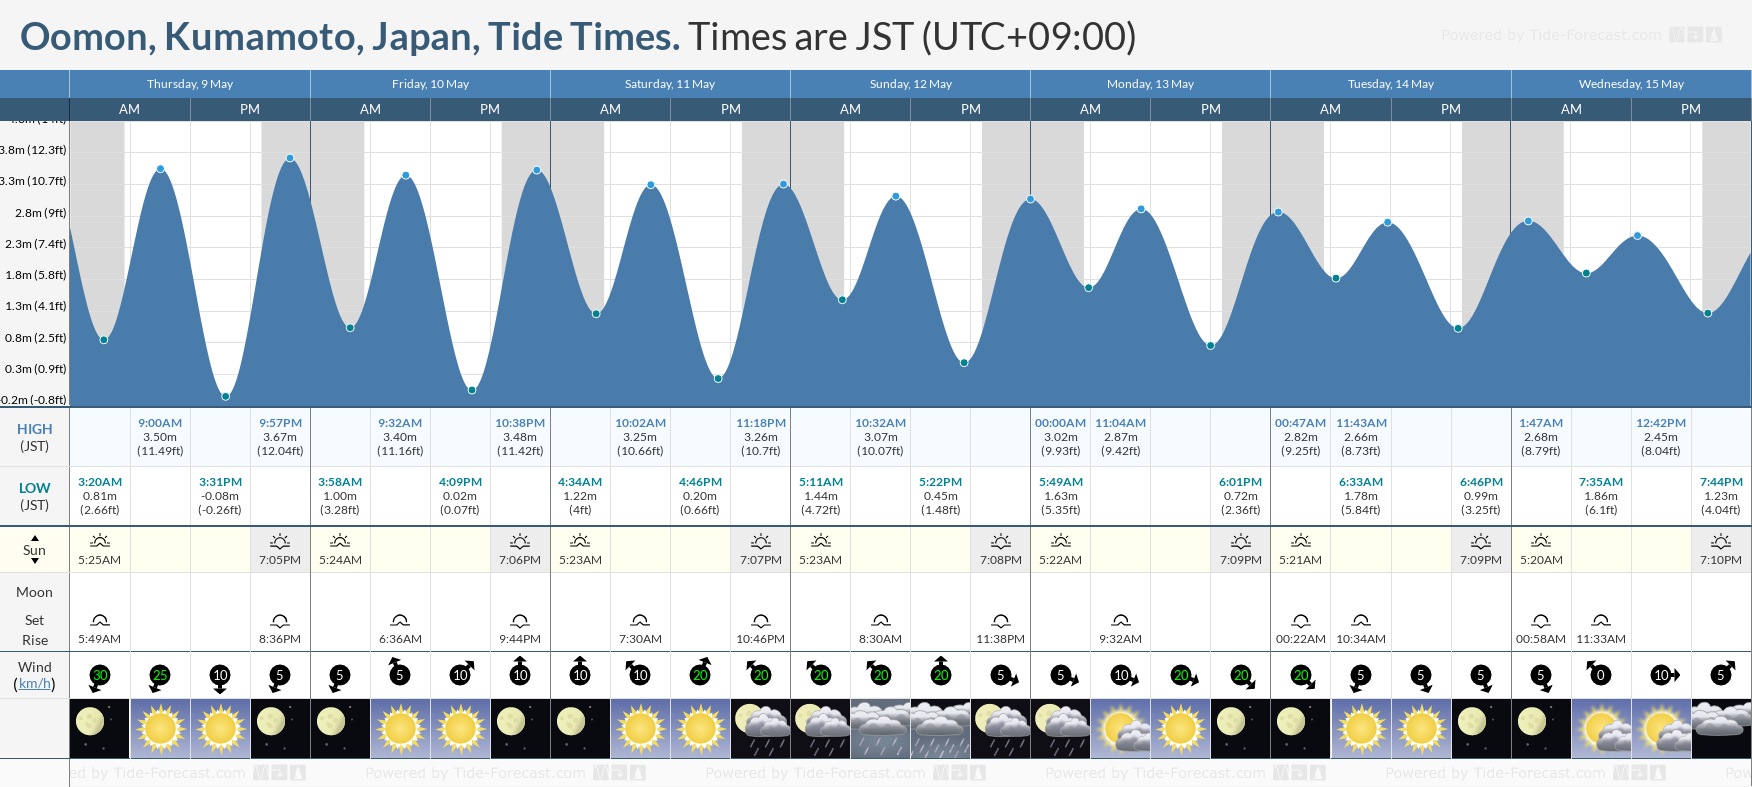 Oomon, Kumamoto, Japan Tide Chart including high and low tide tide times for the next 7 days